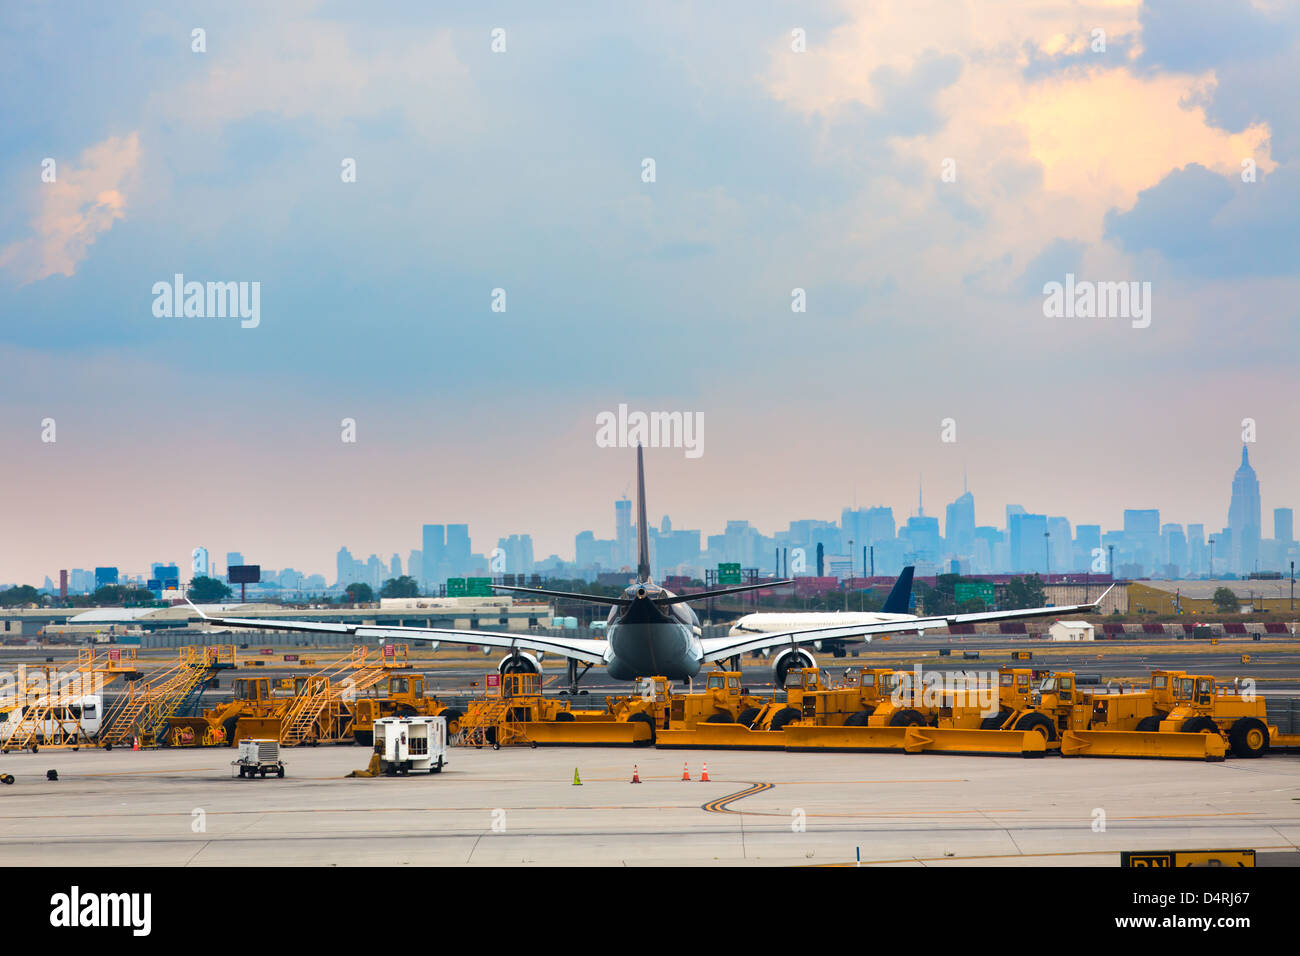 Airports runway and ground services waiting to service. With an airplane in-front of city. Stock Photo